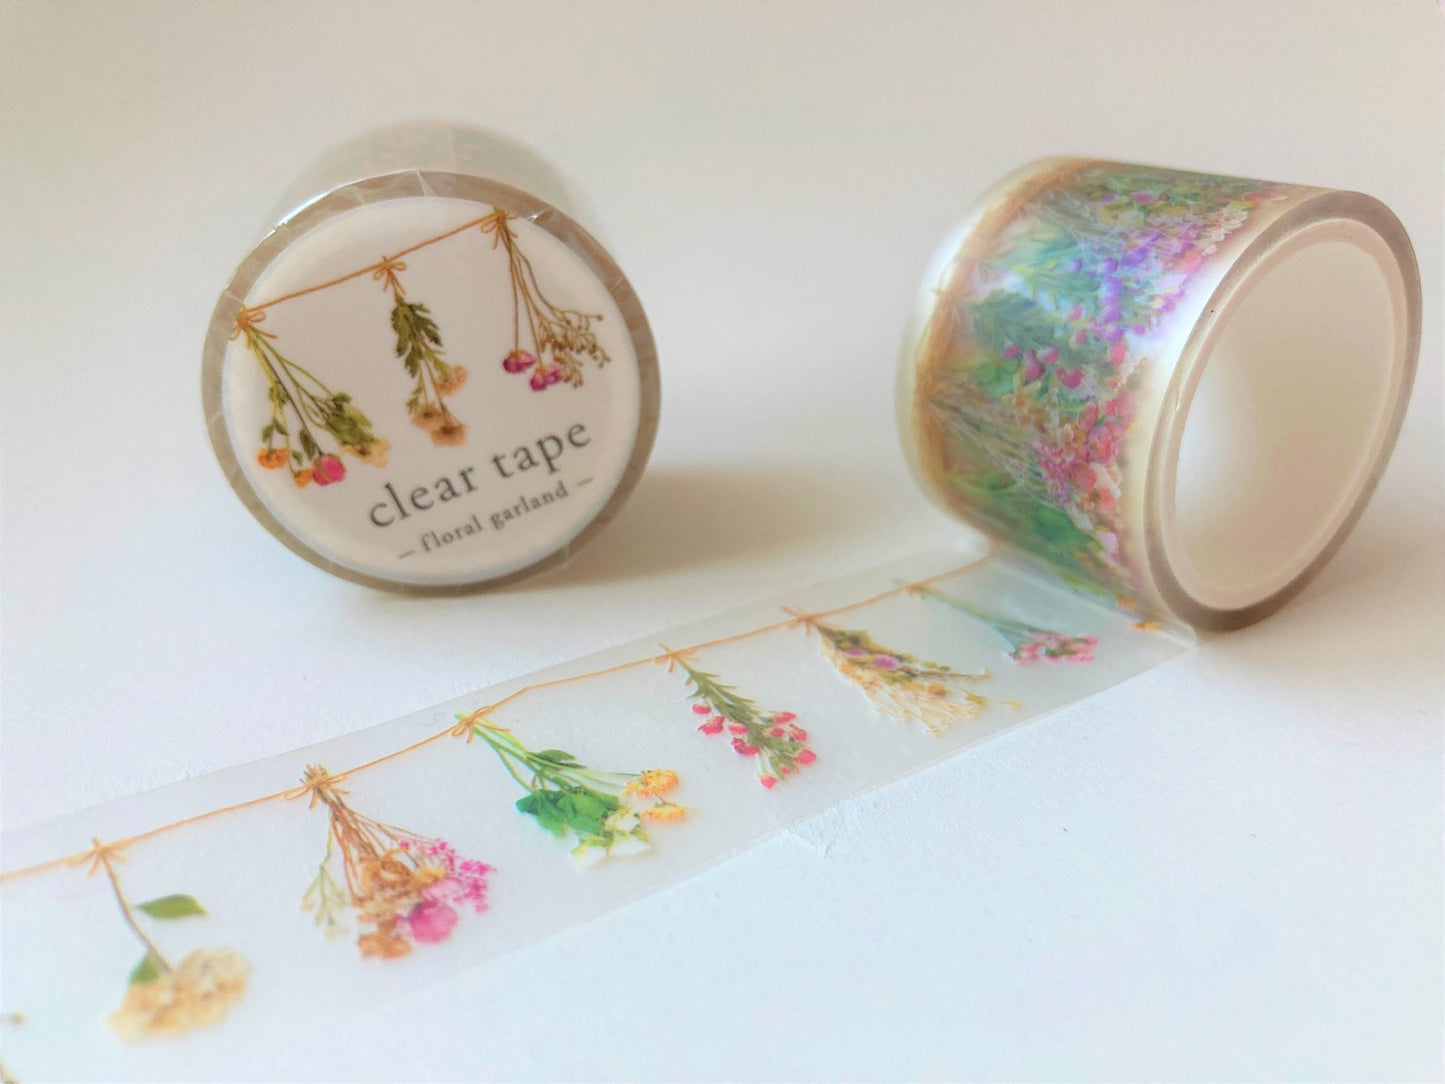 Cleartape 30mm Floral Garland